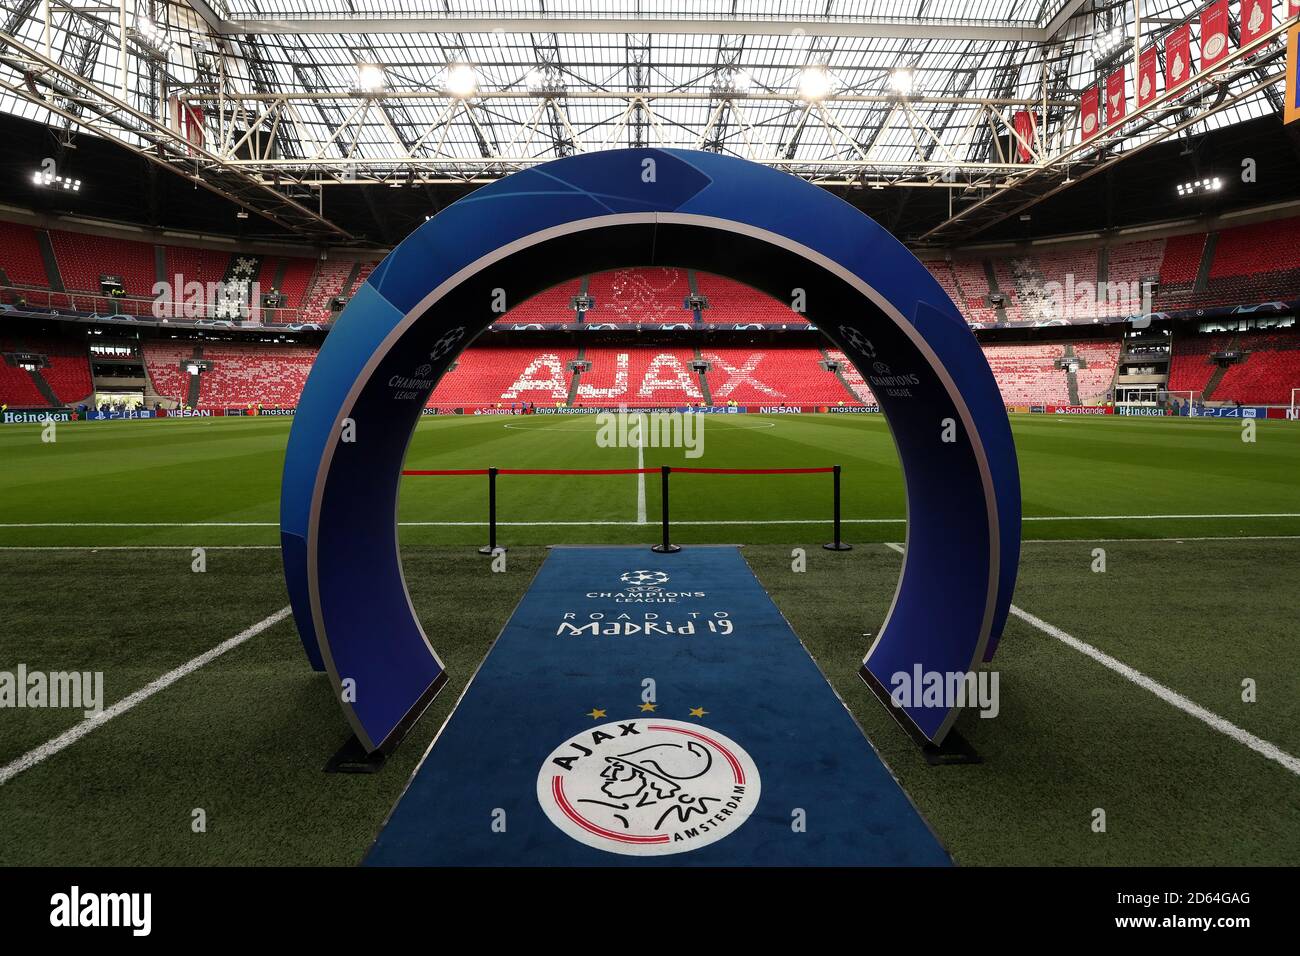 A view of the Johan Cruijff ArenA before the game Stock Photo